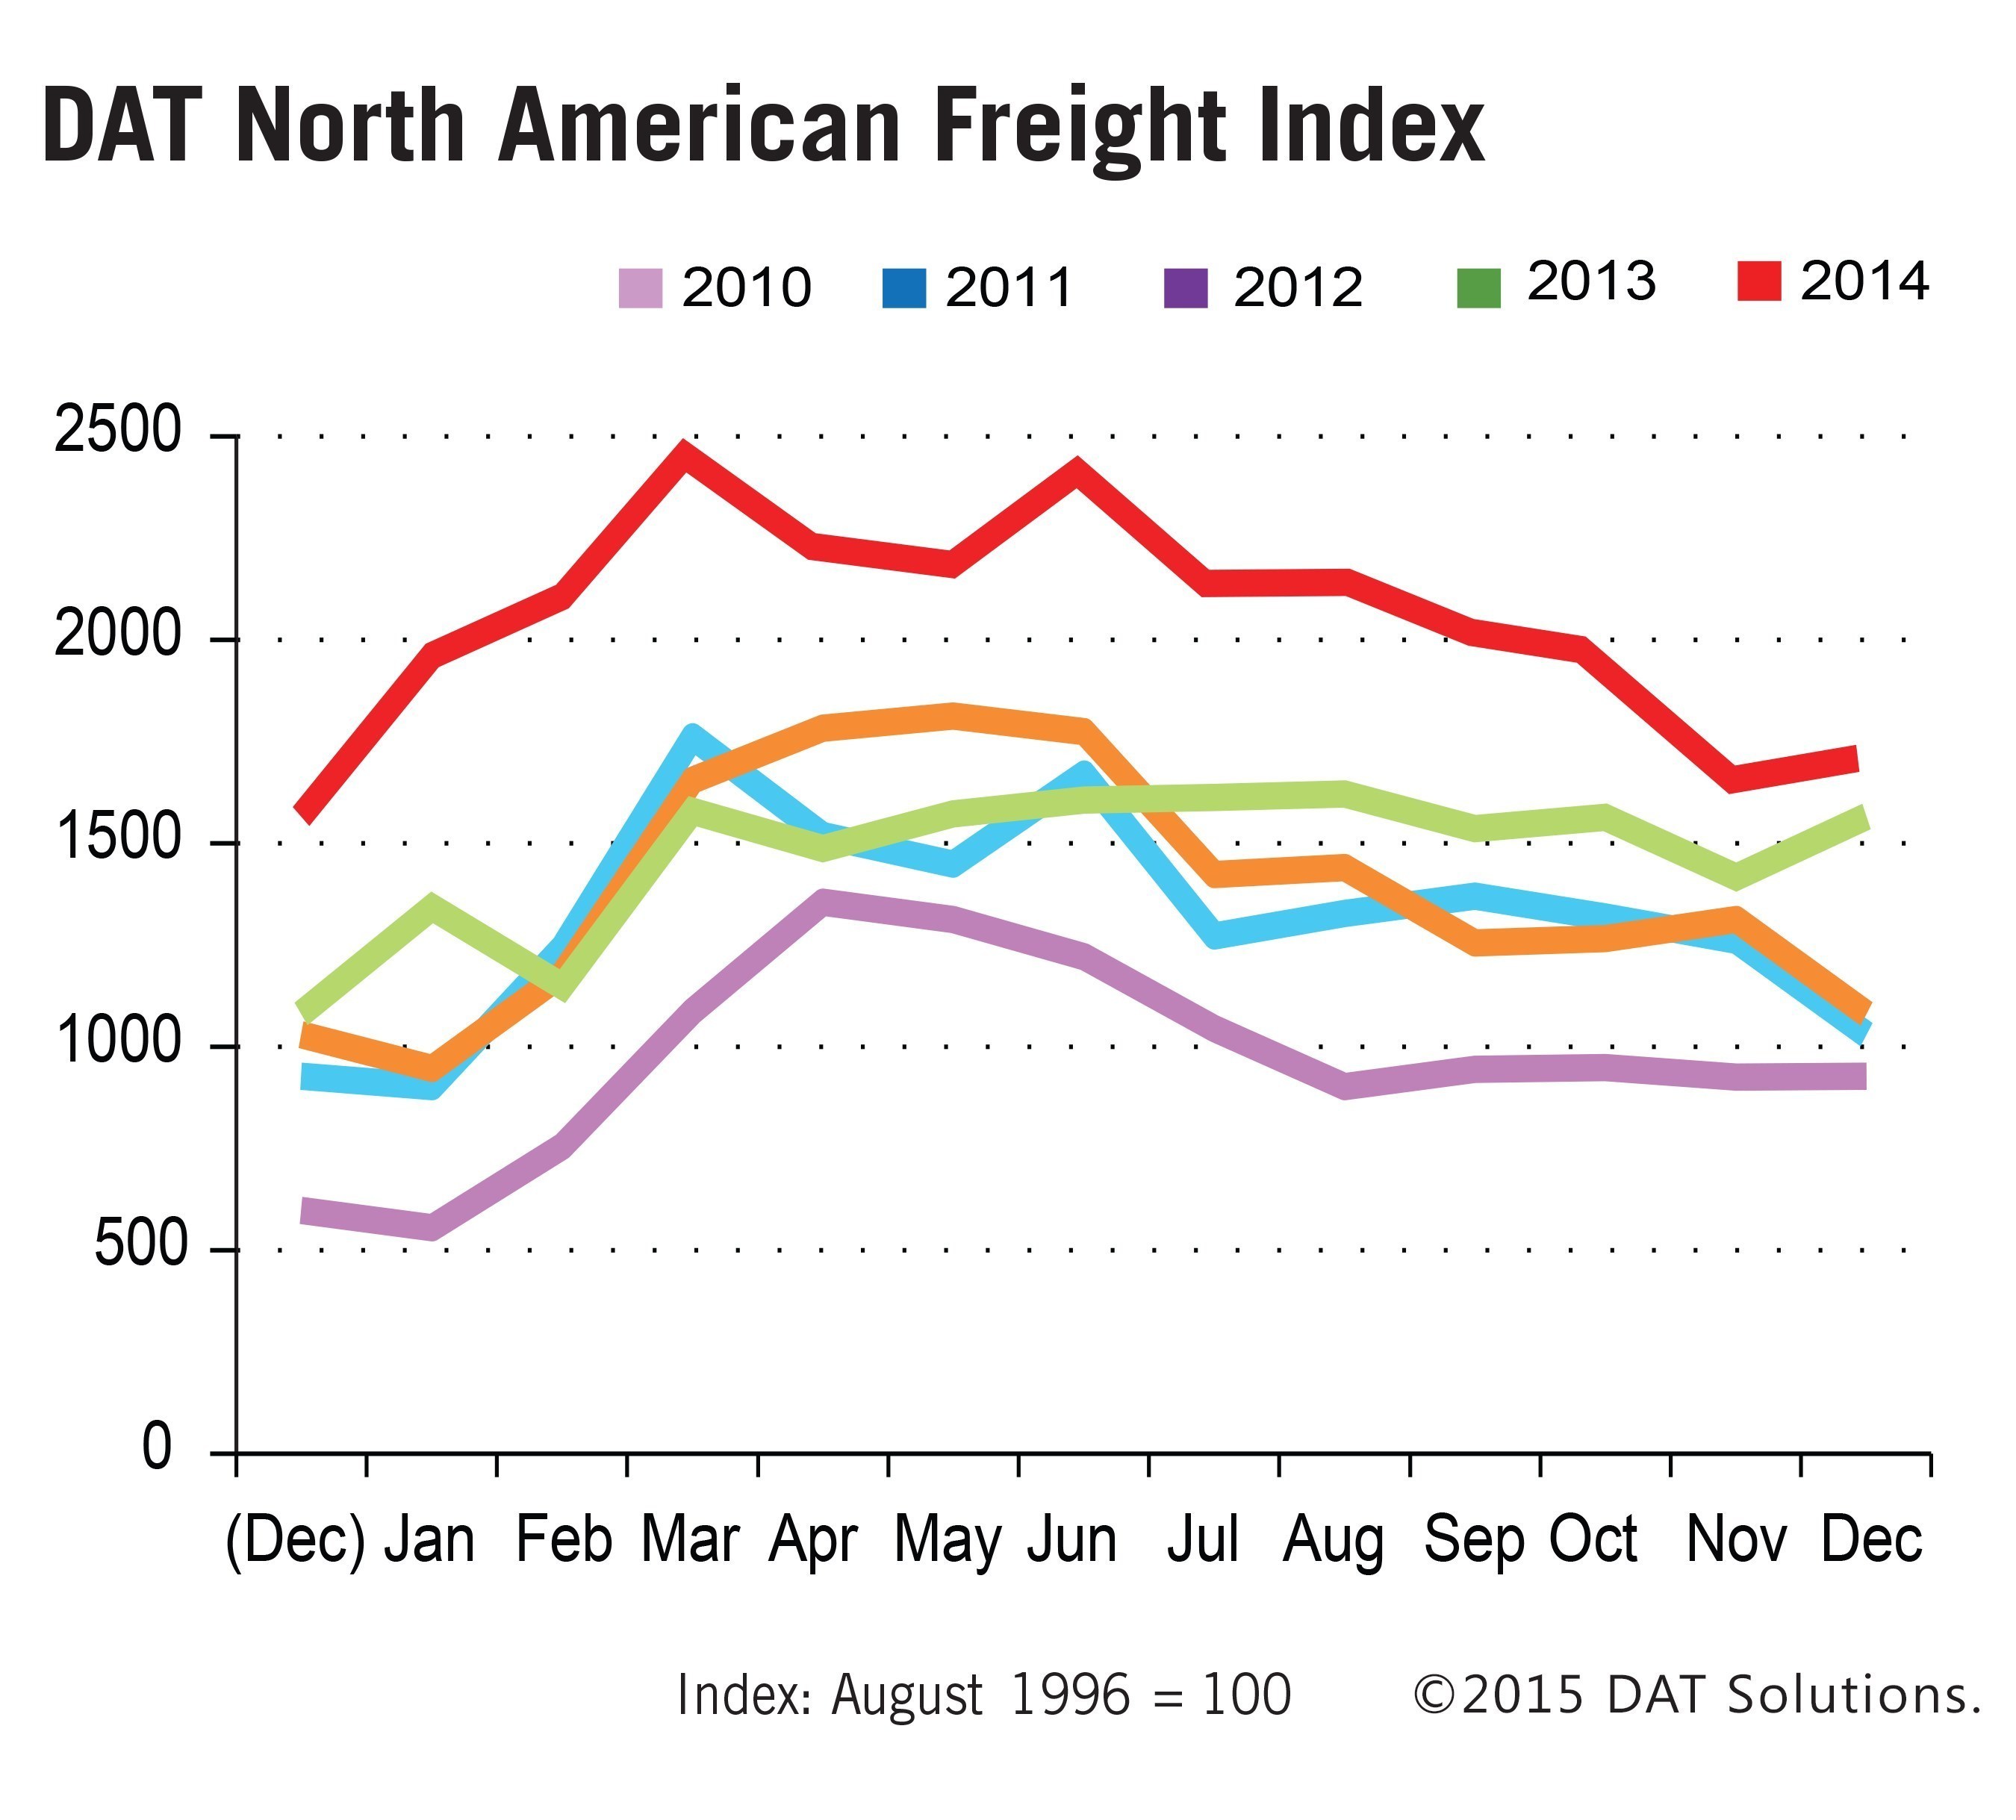 Spot market truckload freight finishes the year strong. DAT Freight Index.